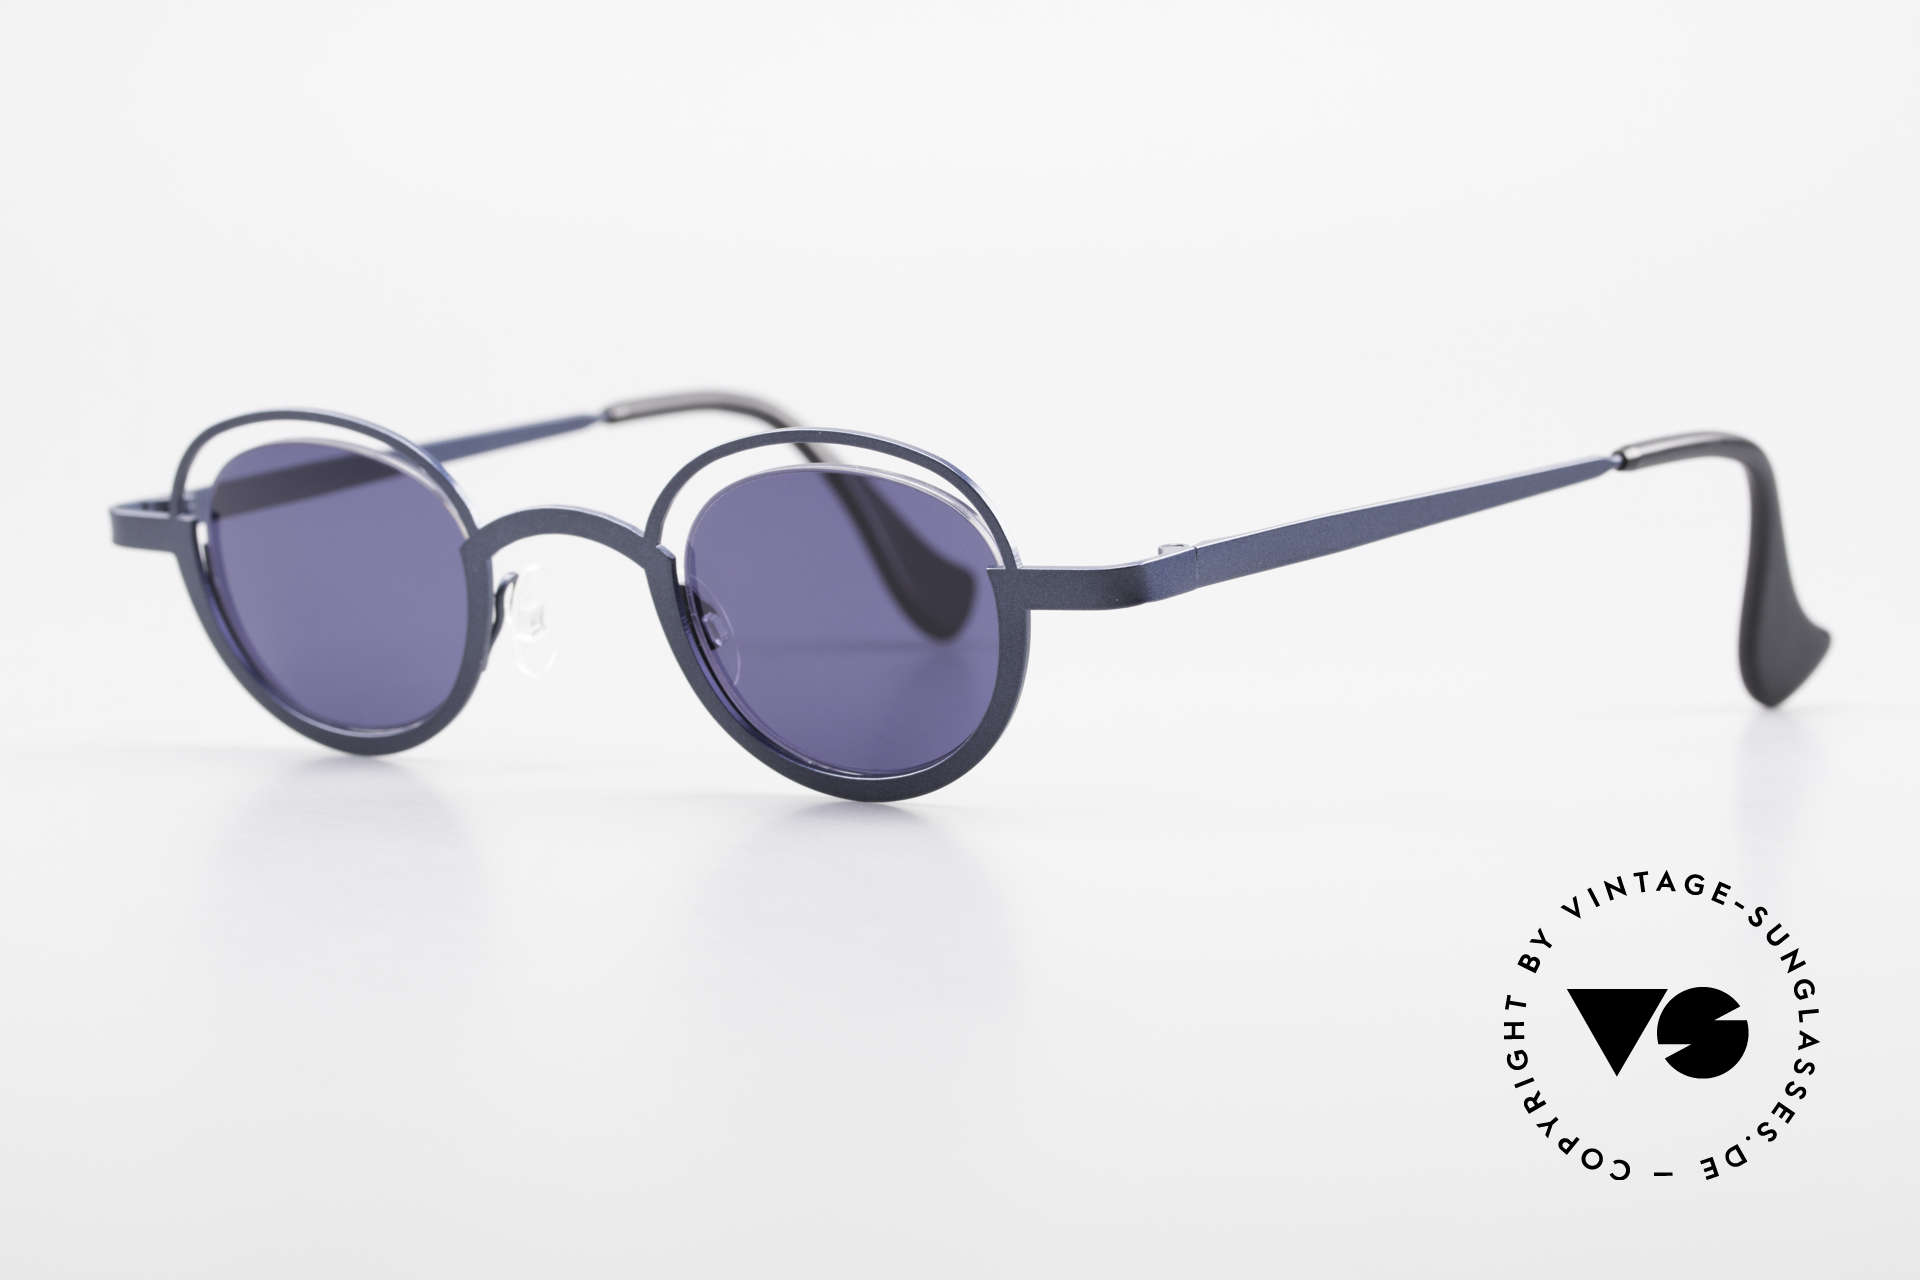 Theo Belgium Dozy Slim Crazy 90's Unisex Sunglasses, lenses are fixed with a nylor thread (truly unique!), Made for Men and Women